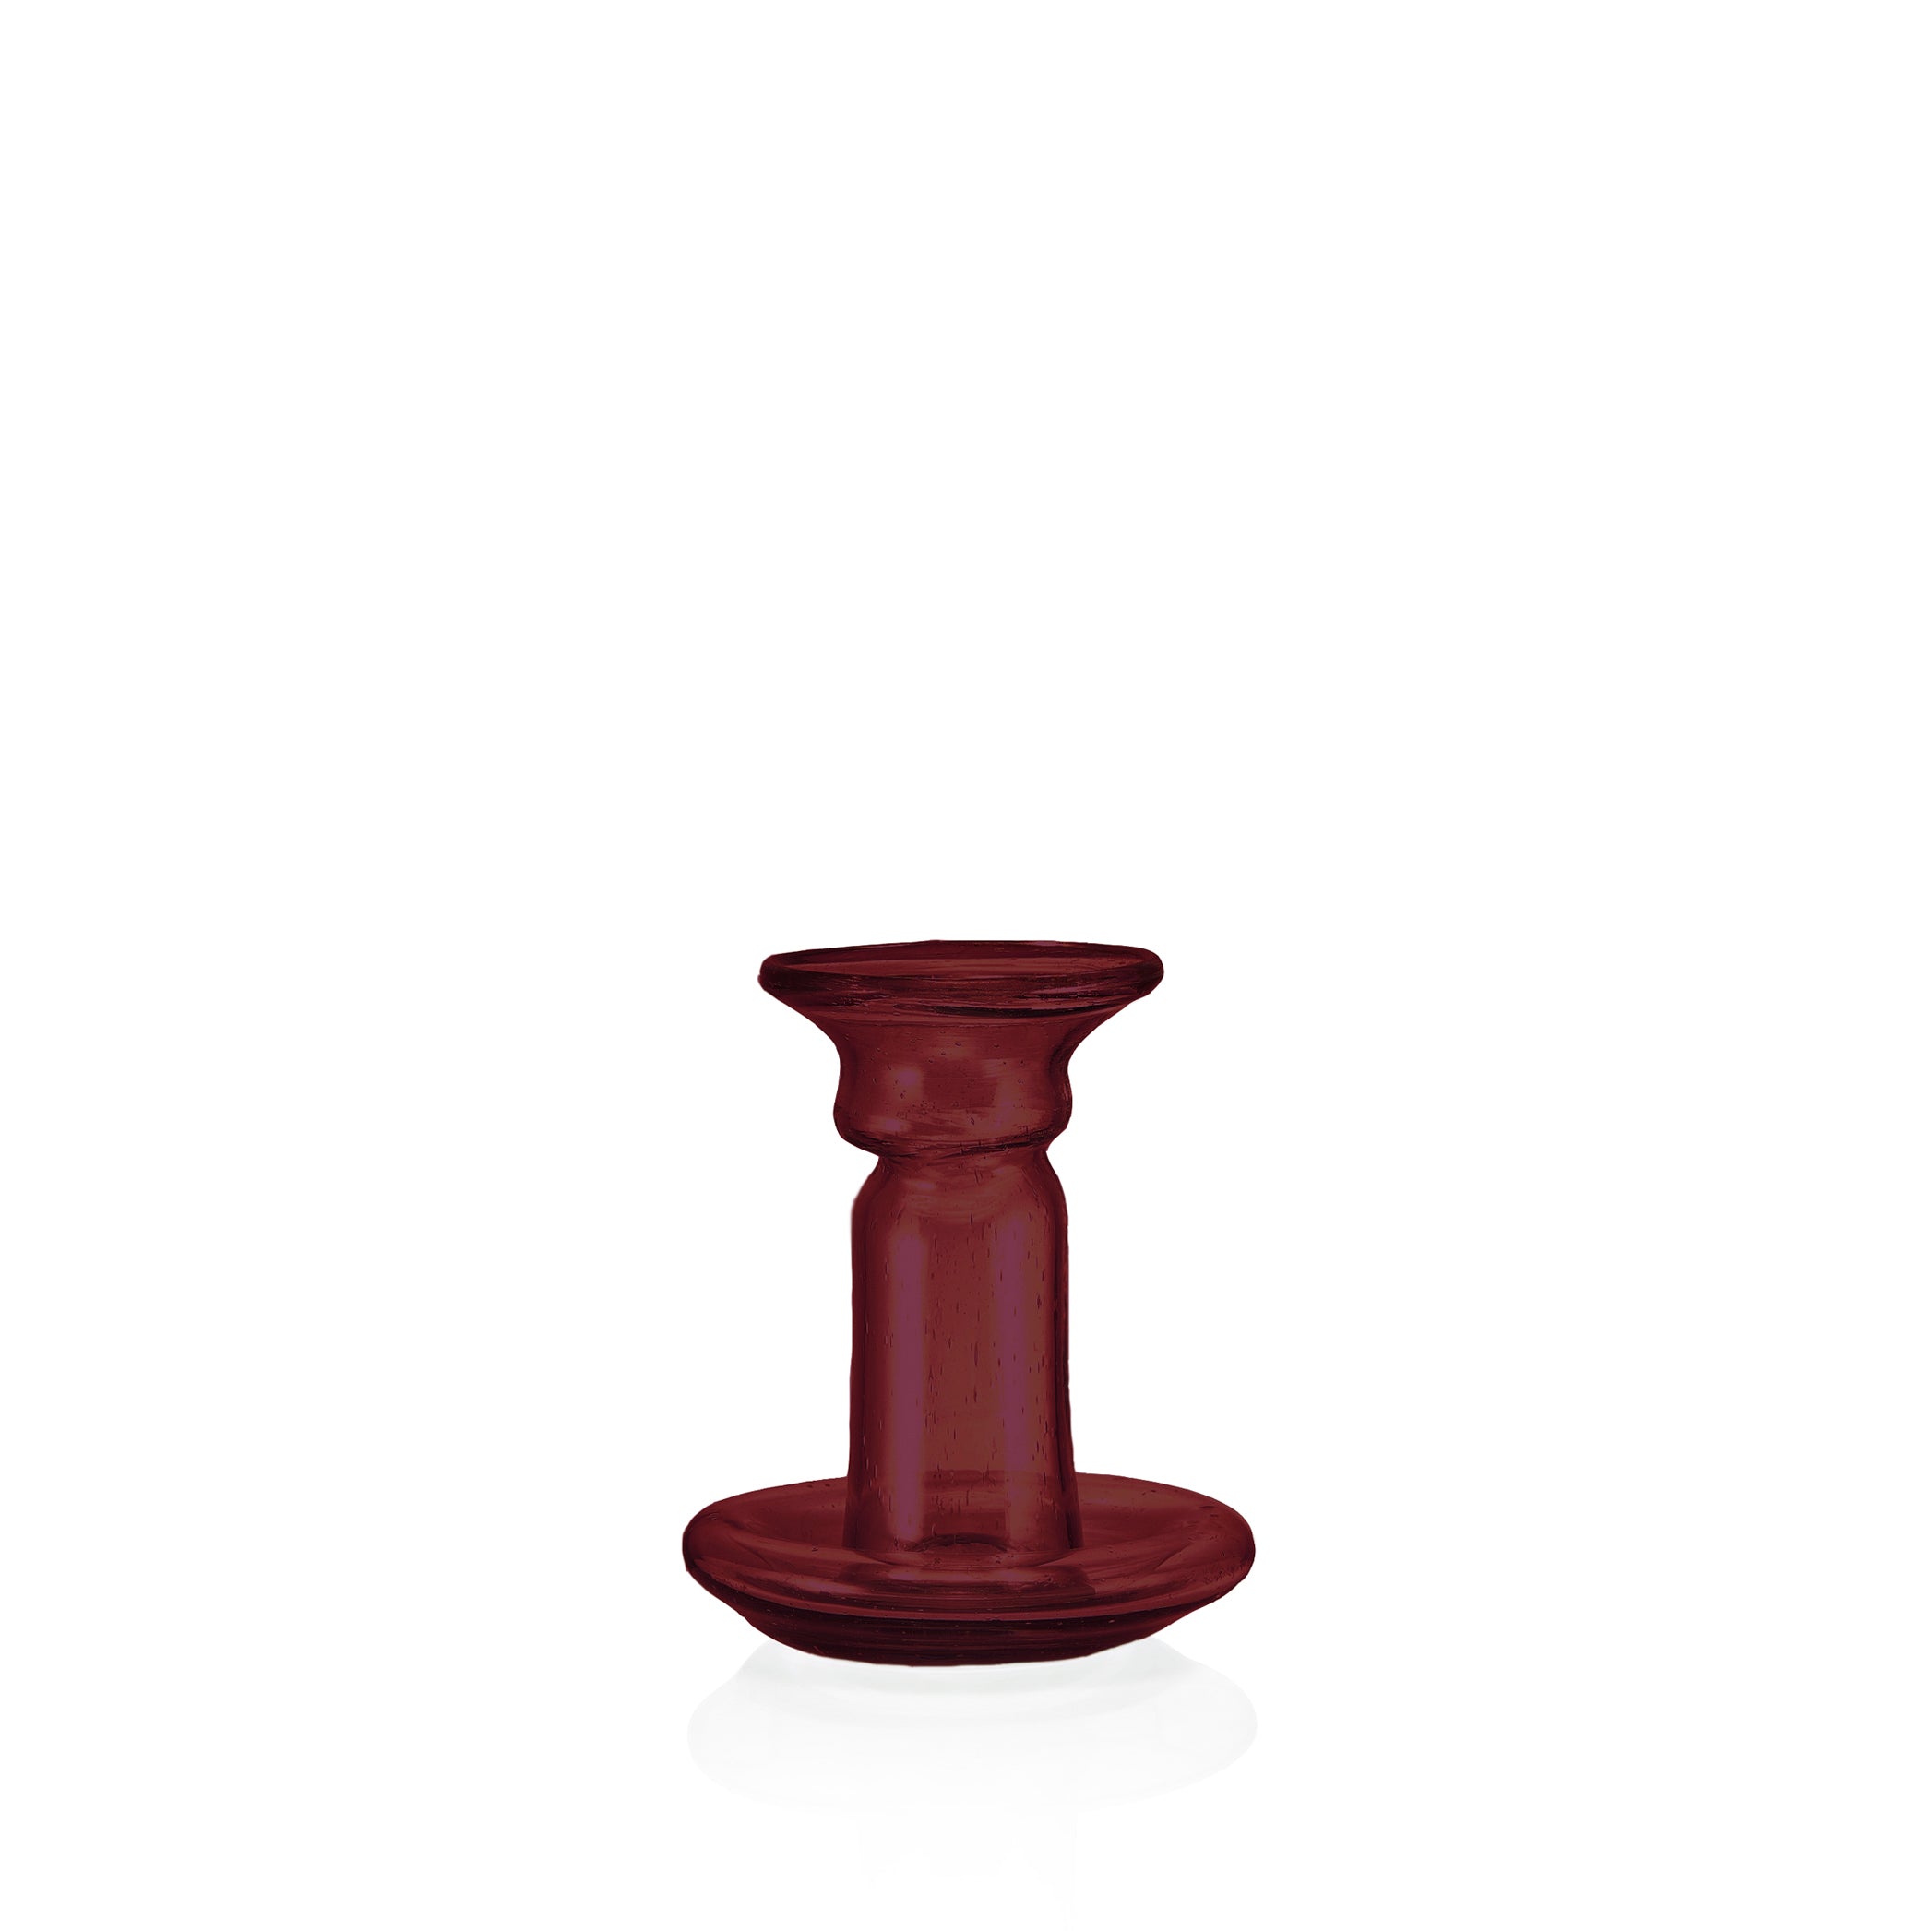 Handblown Small Glass Candlestick in Raspberry Red, 11cm